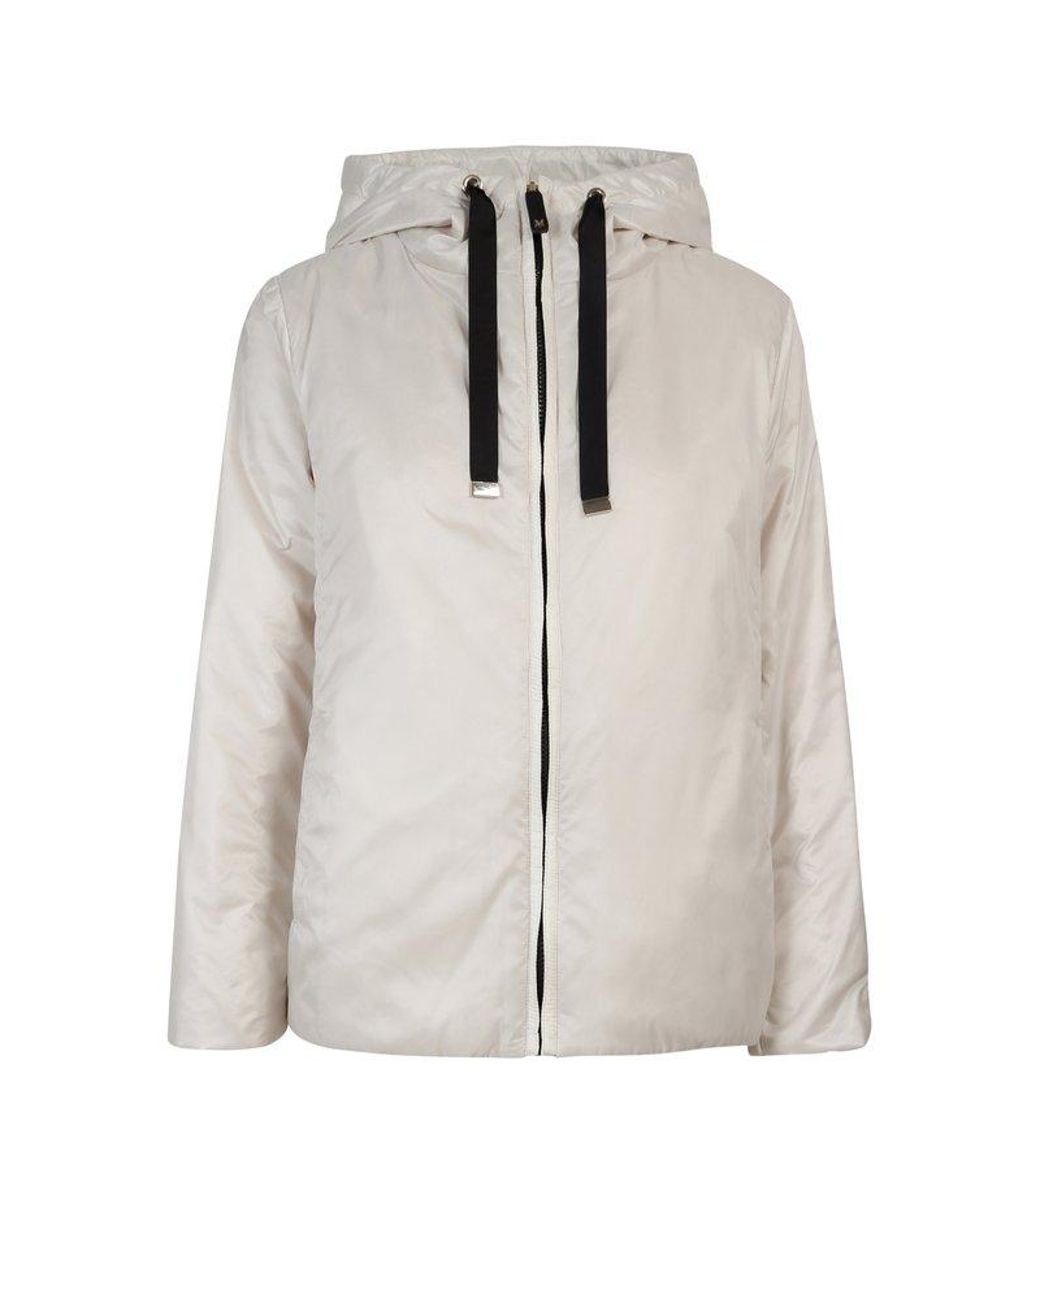 Max Mara The Cube Cotton Greenh Water-repellent Jacket in White | Lyst